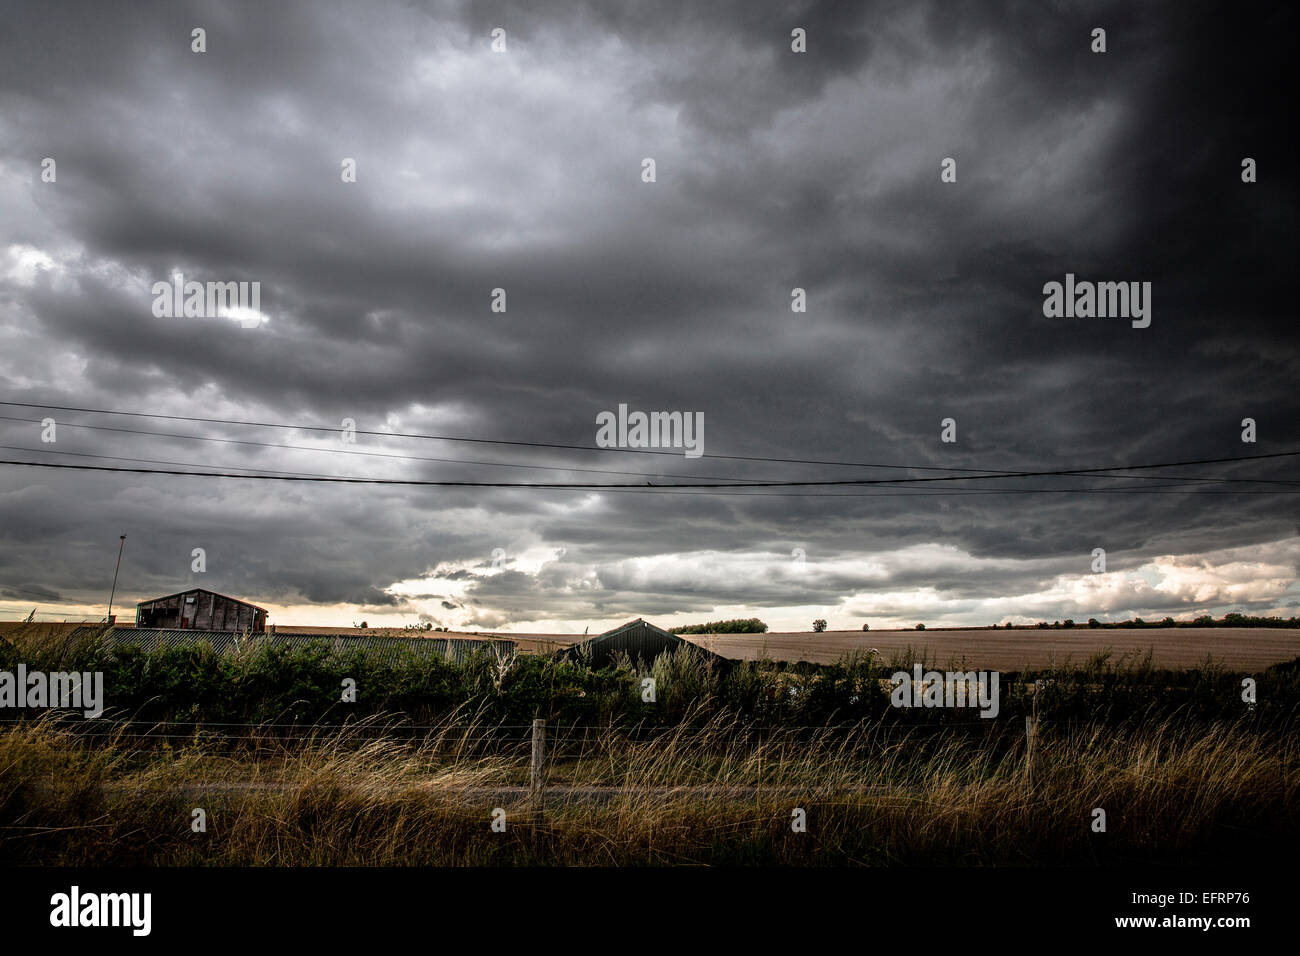 Dramatic sky with grey storm clouds over rural landscape Stock Photo